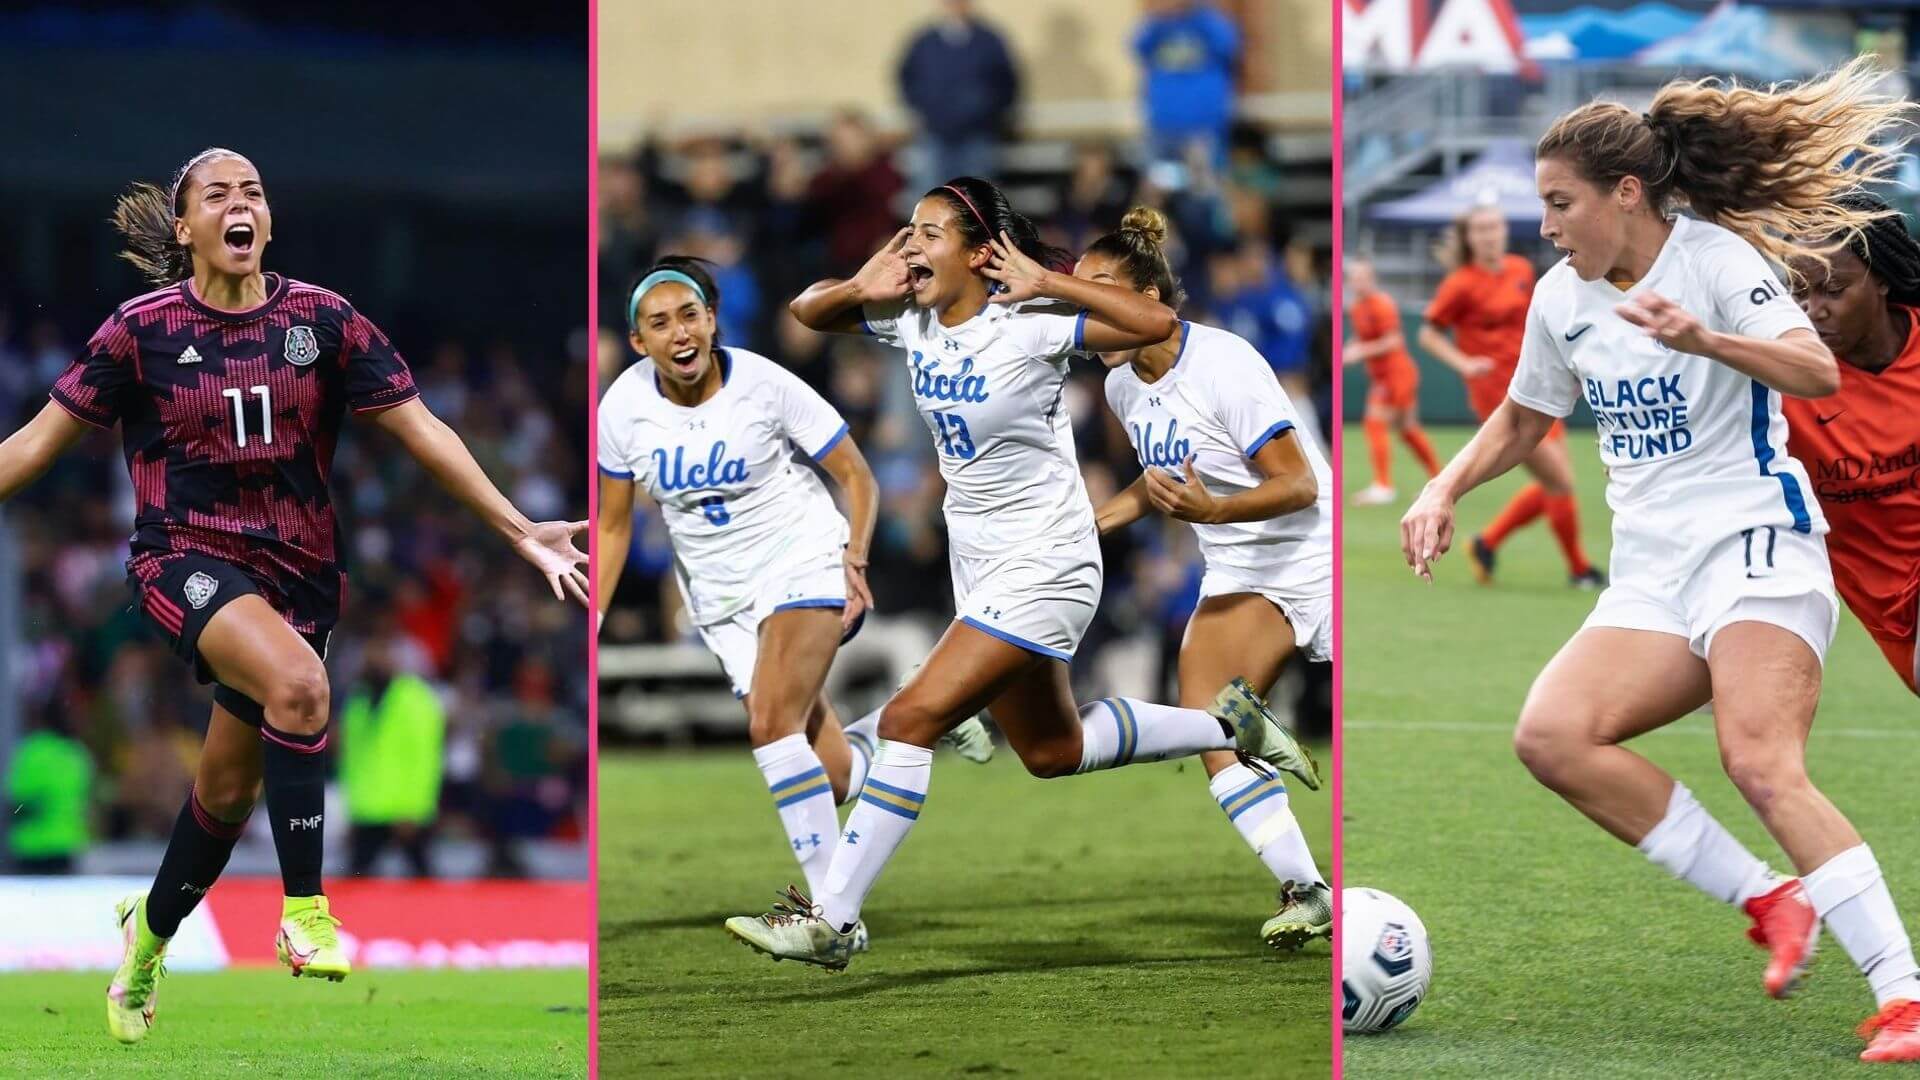 Here's our list for 7 amazing Latina soccer players